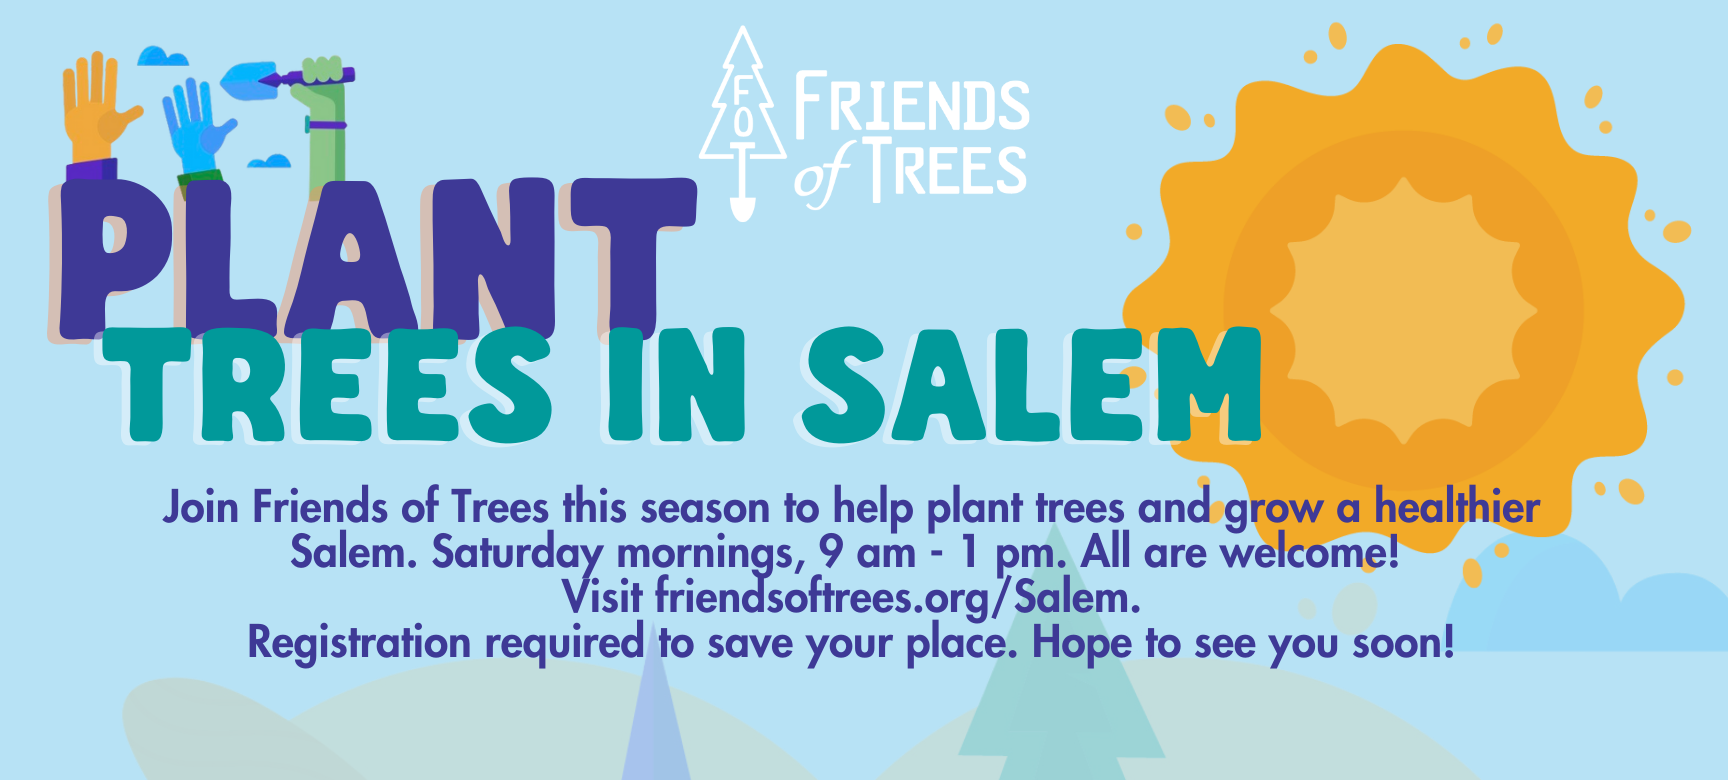 Friends of Trees plant trees in Salem with sun and volunteer hands